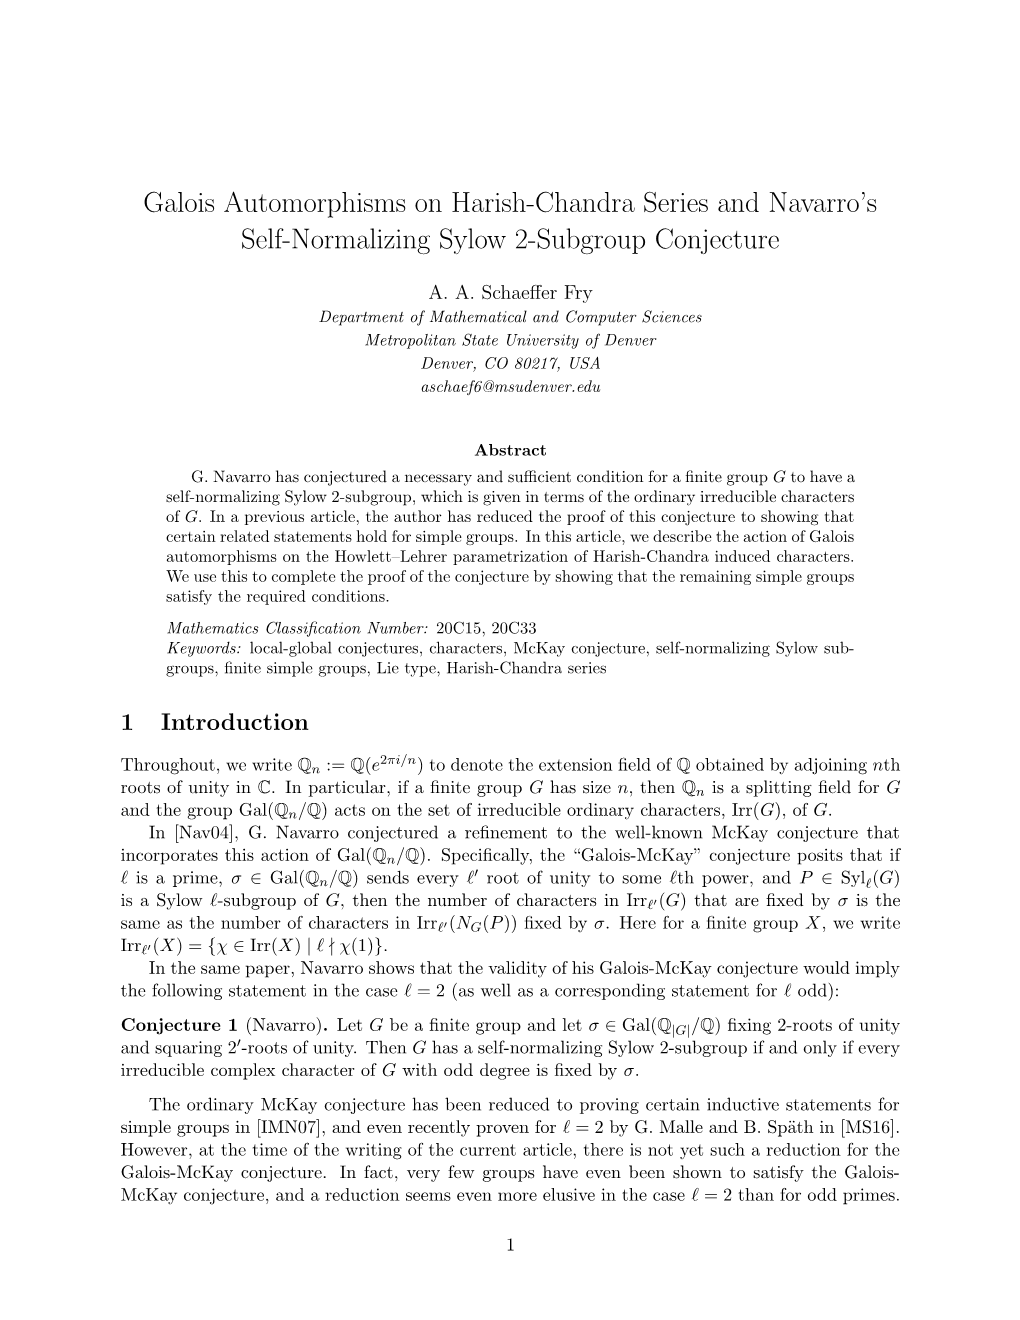 Galois Automorphisms on Harish-Chandra Series and Navarro’S Self-Normalizing Sylow 2-Subgroup Conjecture